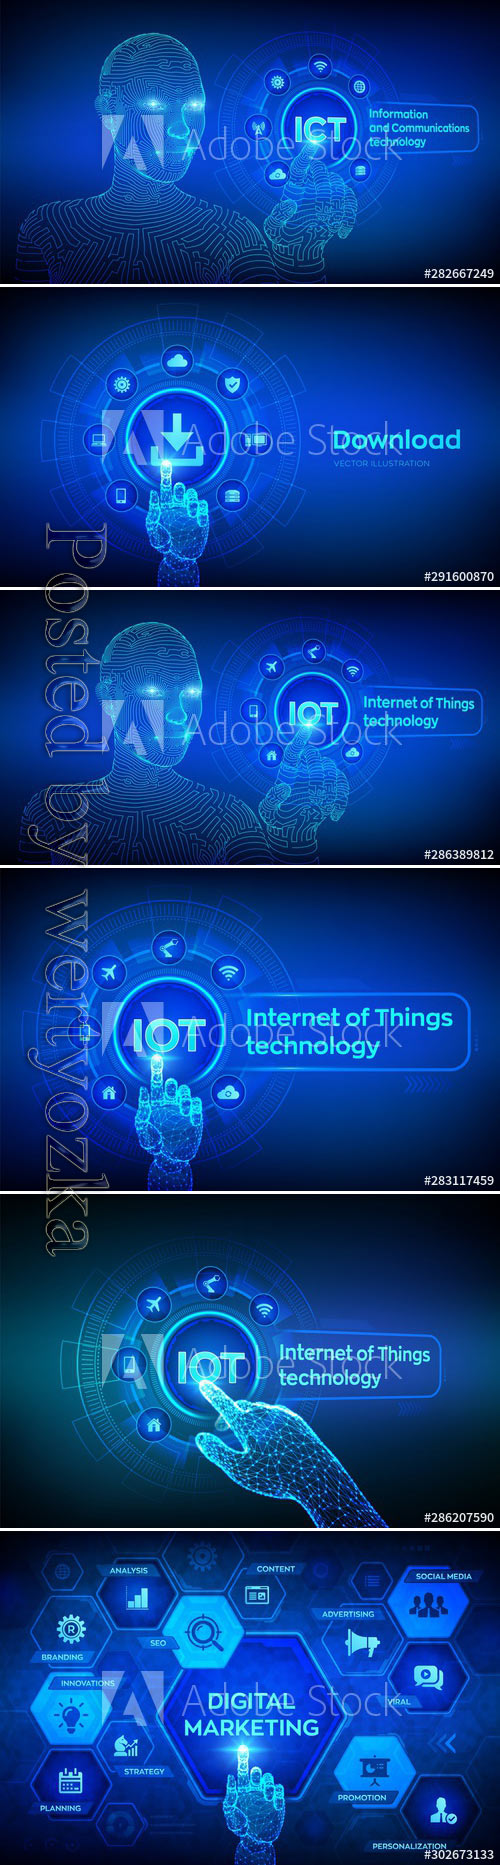 Internet of things technology concept on virtual screen